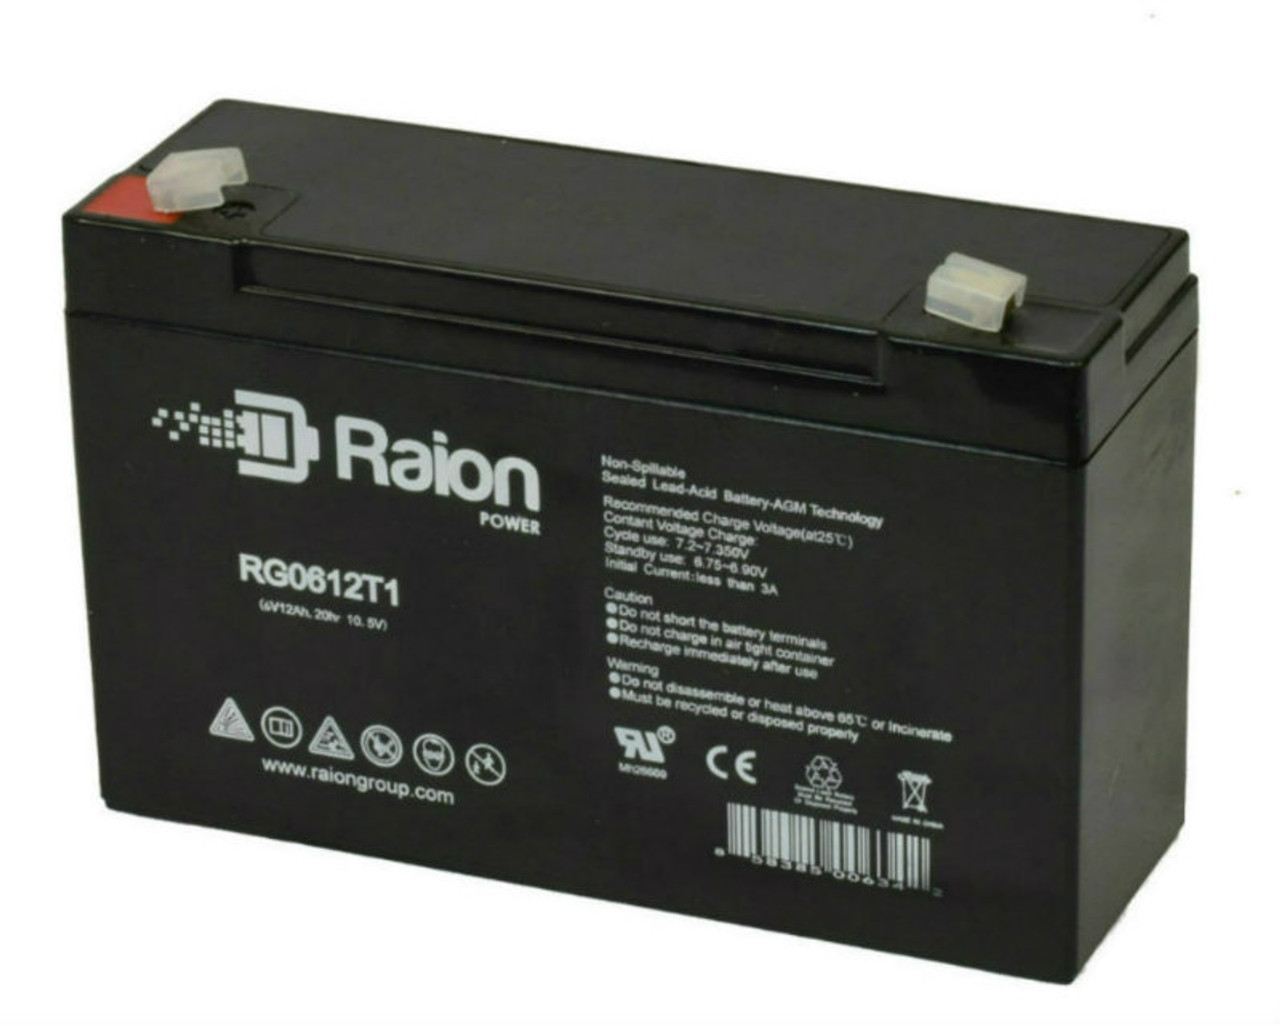 Raion Power RG06120T1 Replacement Battery for MCA NP10-6